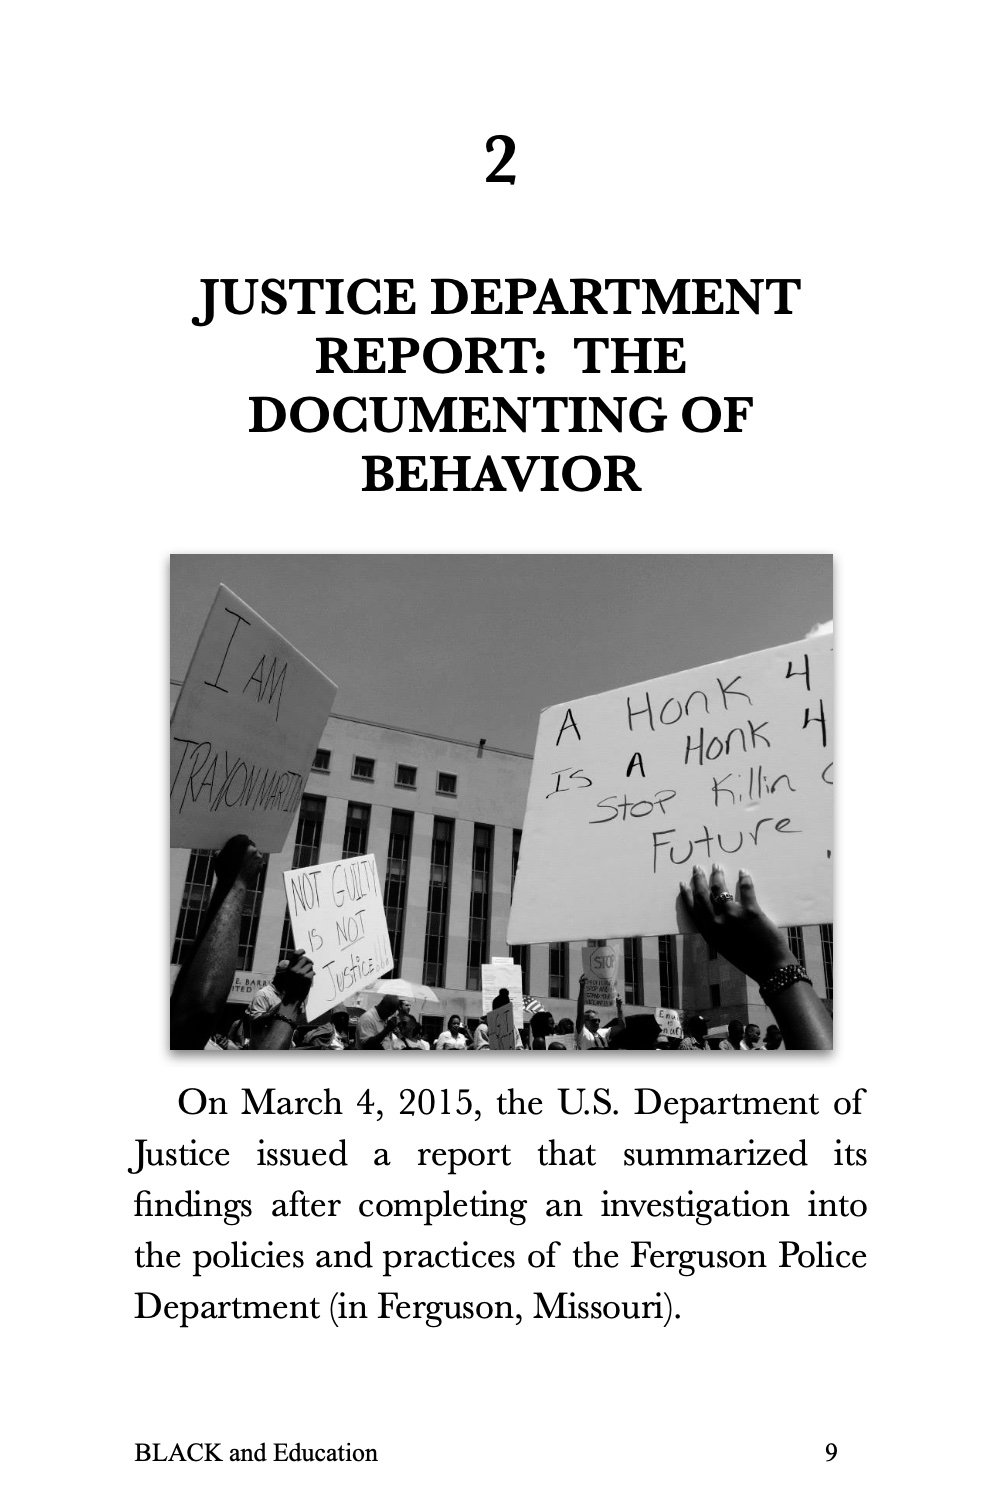 Stories about Black History Vol 3 - Justice Department 2015.jpg